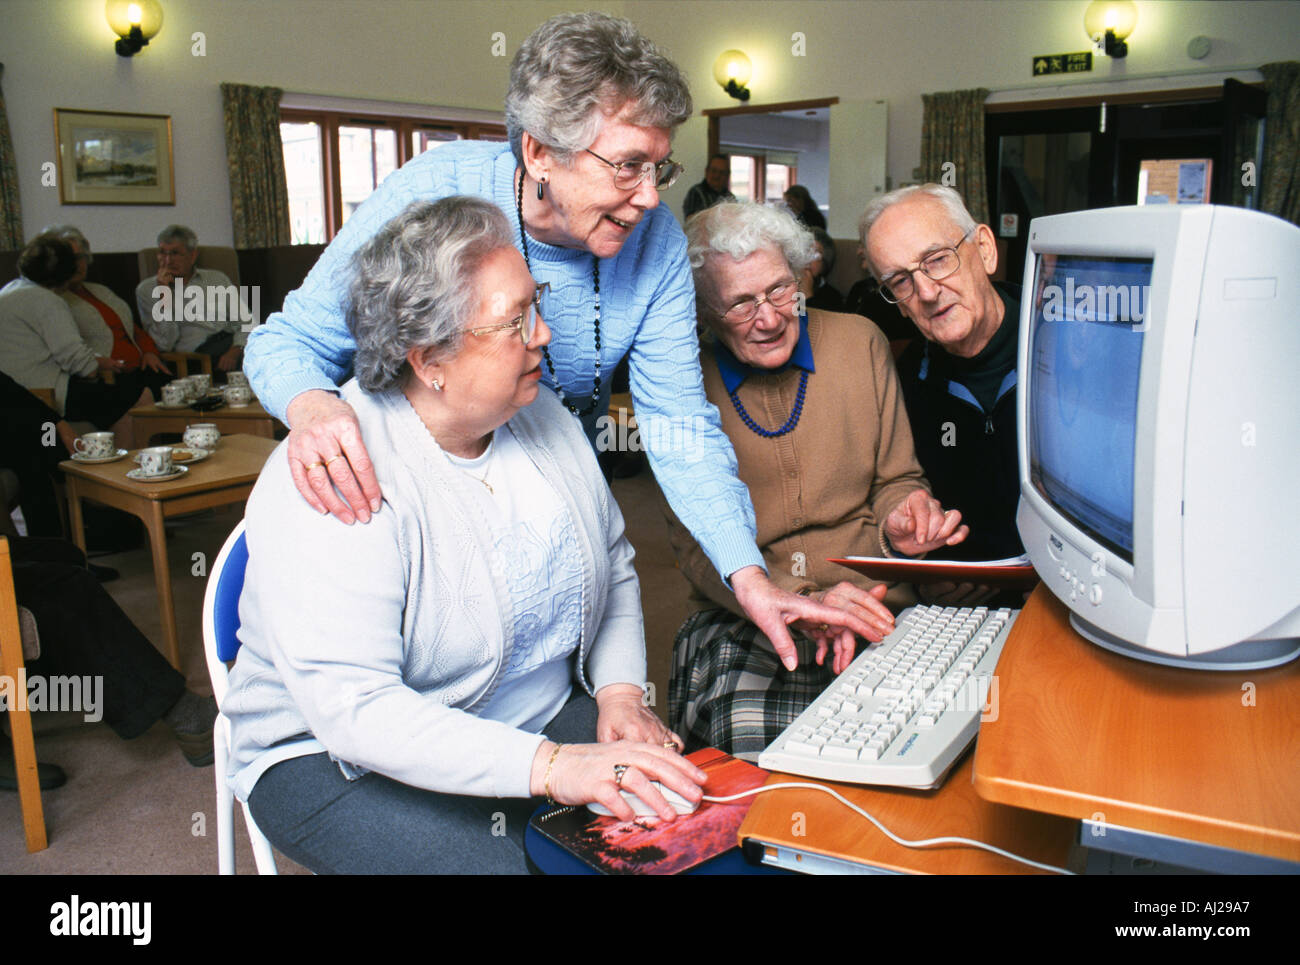 Group of elderly people using a computer. Stock Photo